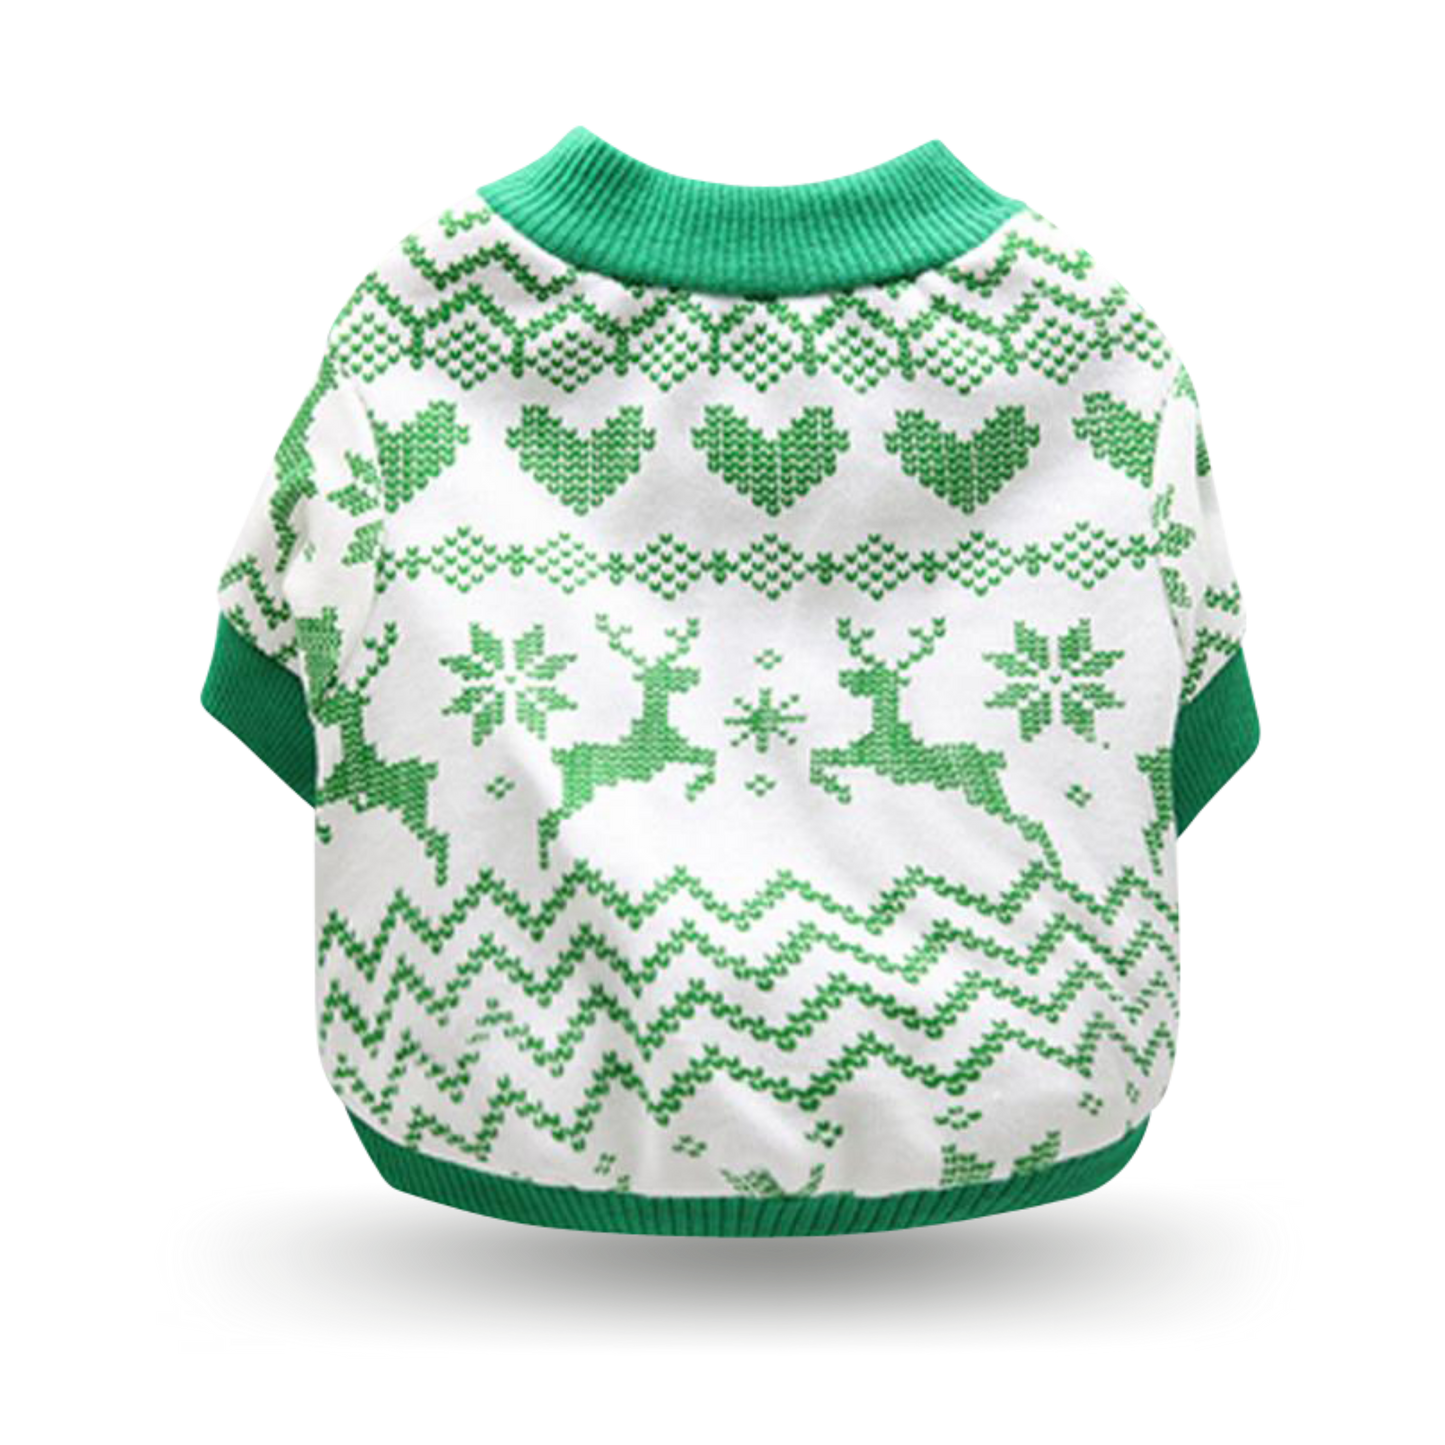 Soft cotton white t-shirt with ribbing collar, arm and waist bands with green love hearts, reindeer and snow-flakes screen printed motif